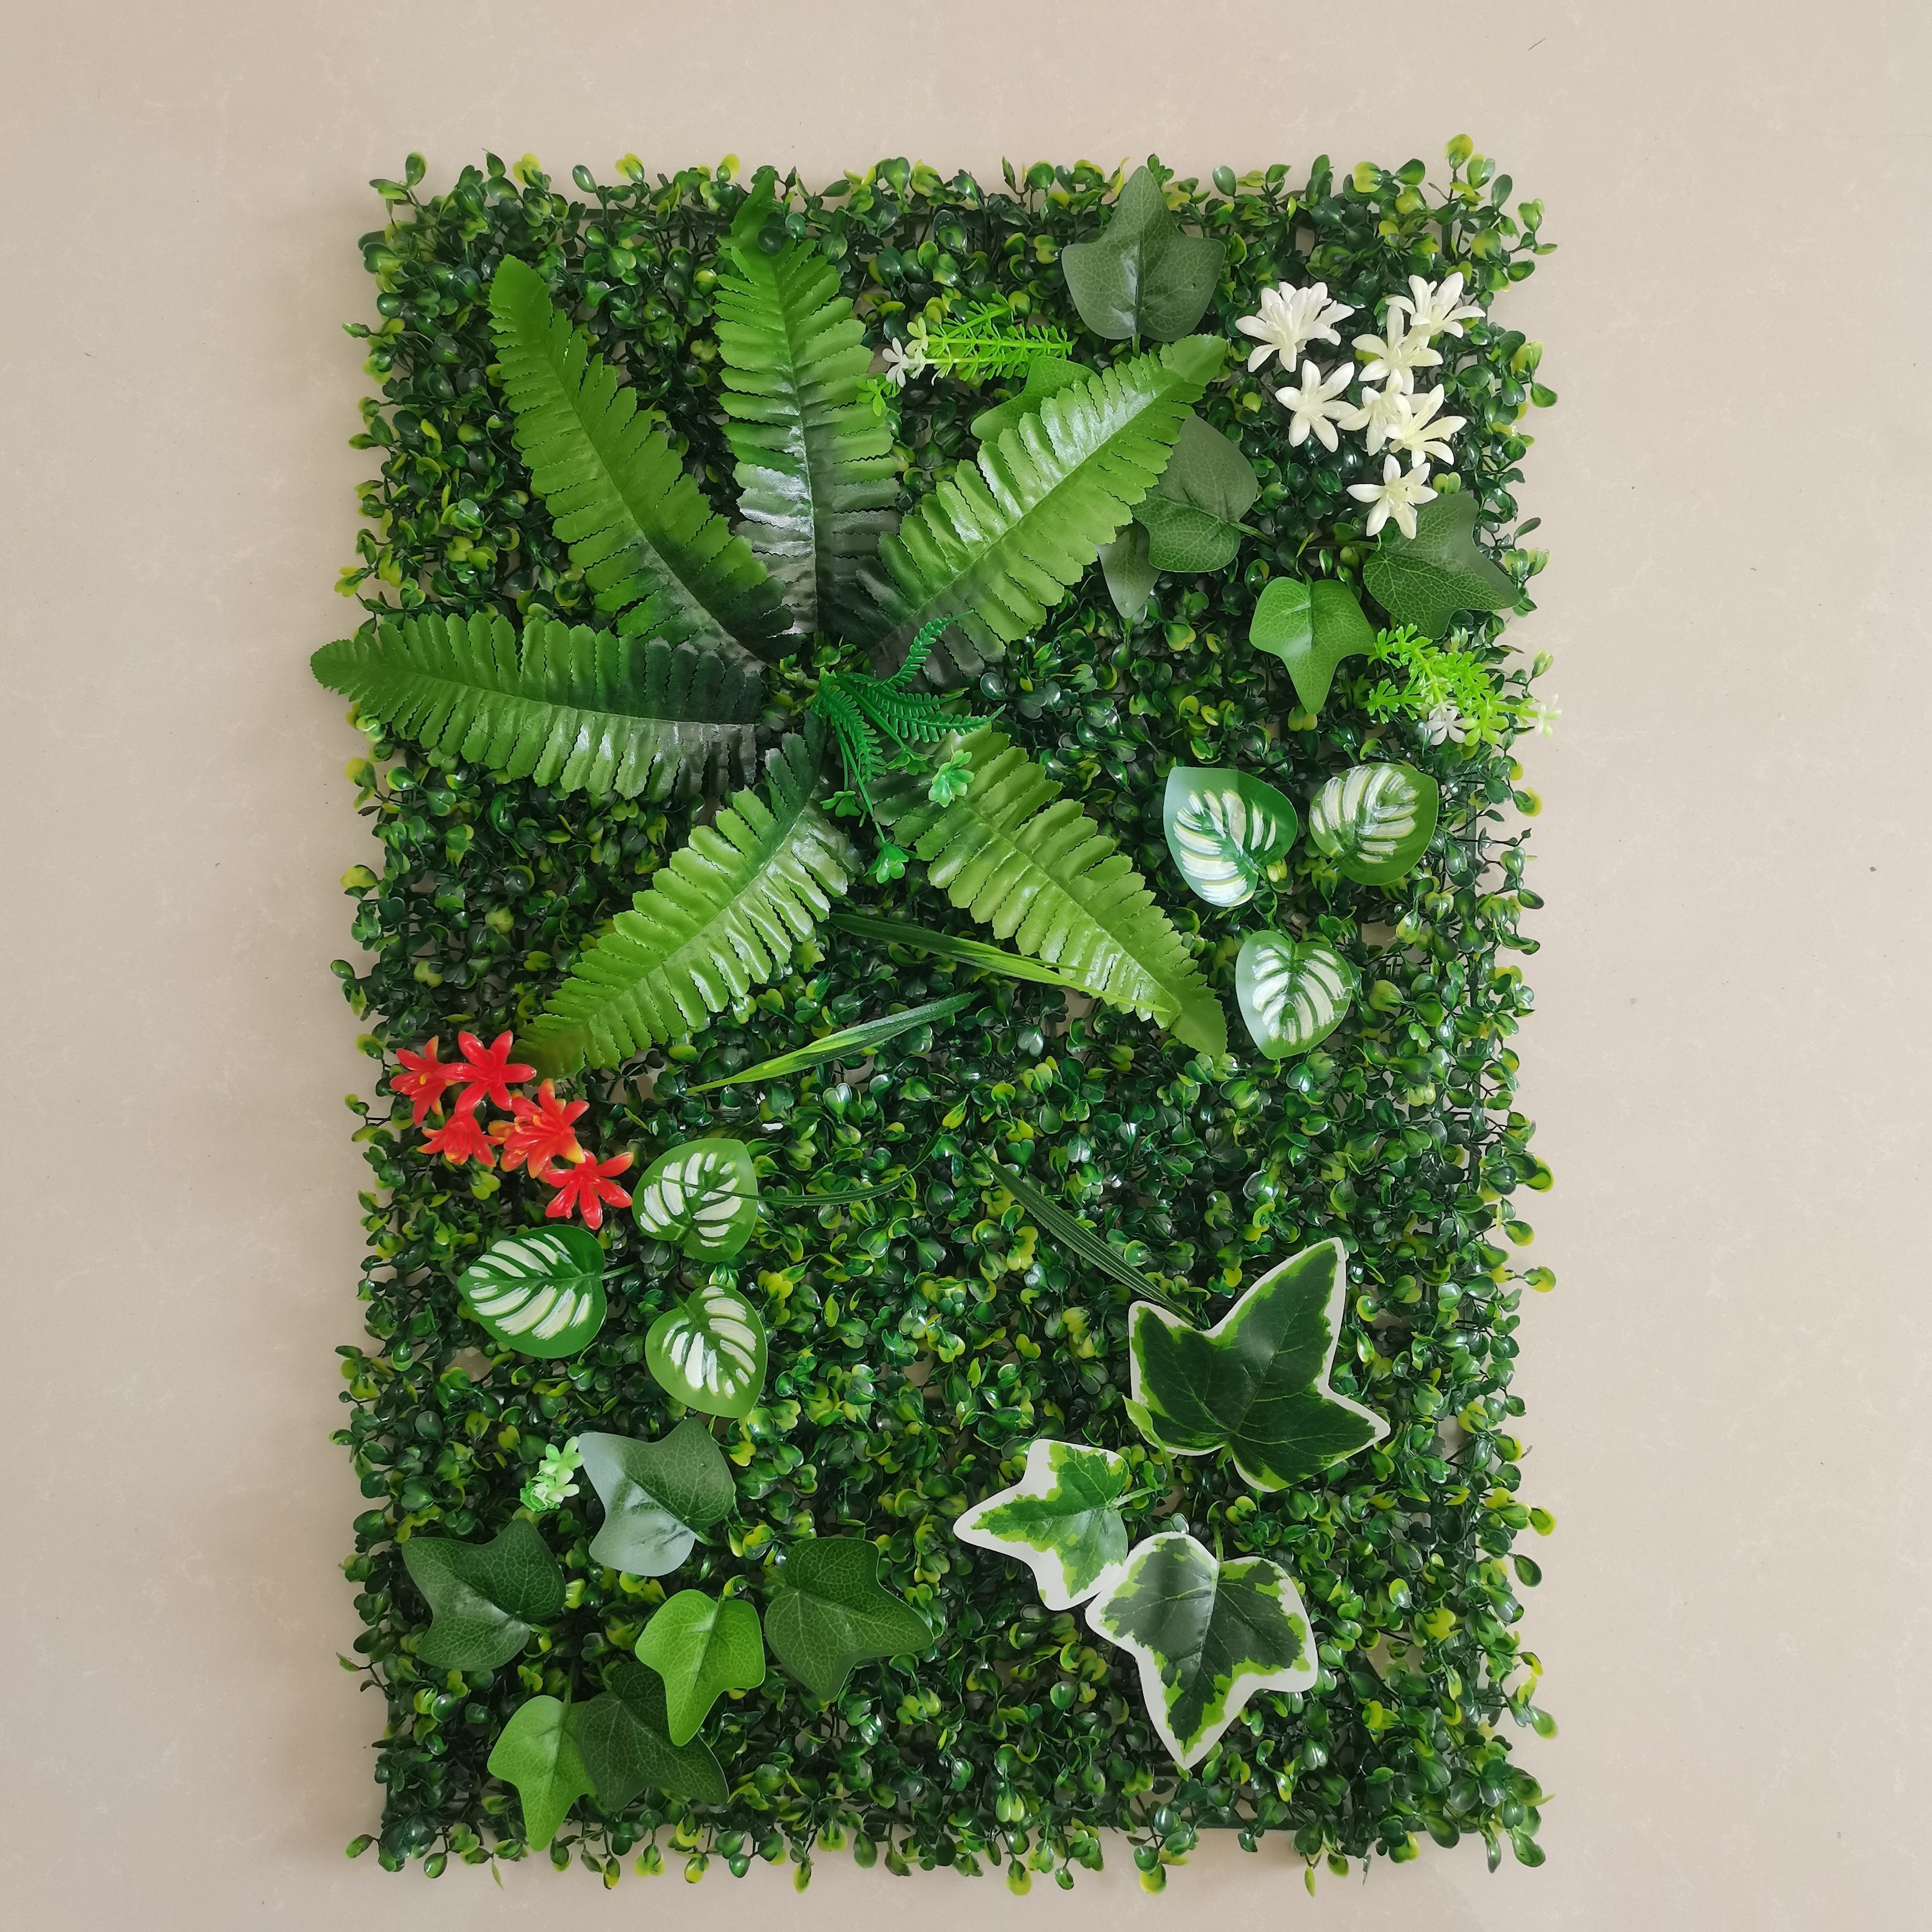 

1pc Artificial Plant Wall Panels, 3d Lifelike Plastic Greenery Panel, Uv Resistant, Indoor & Outdoor Lawn Fence Decor For Weddings, Parties, Garden, Backyard, 40x60cm/15.75x23.62inch